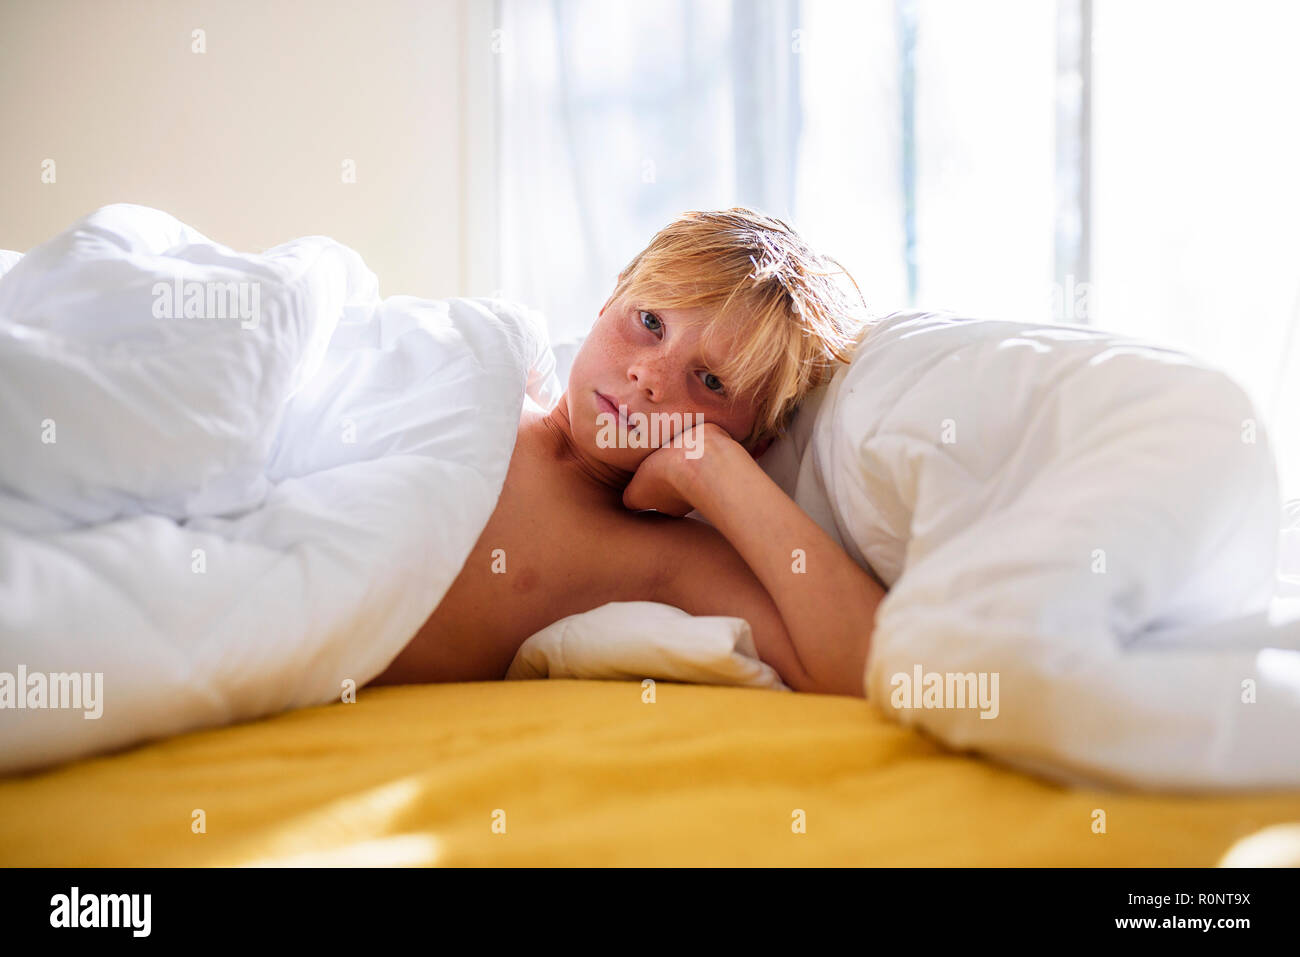 Boy lying in bed leaning on his elbow Stock Photo